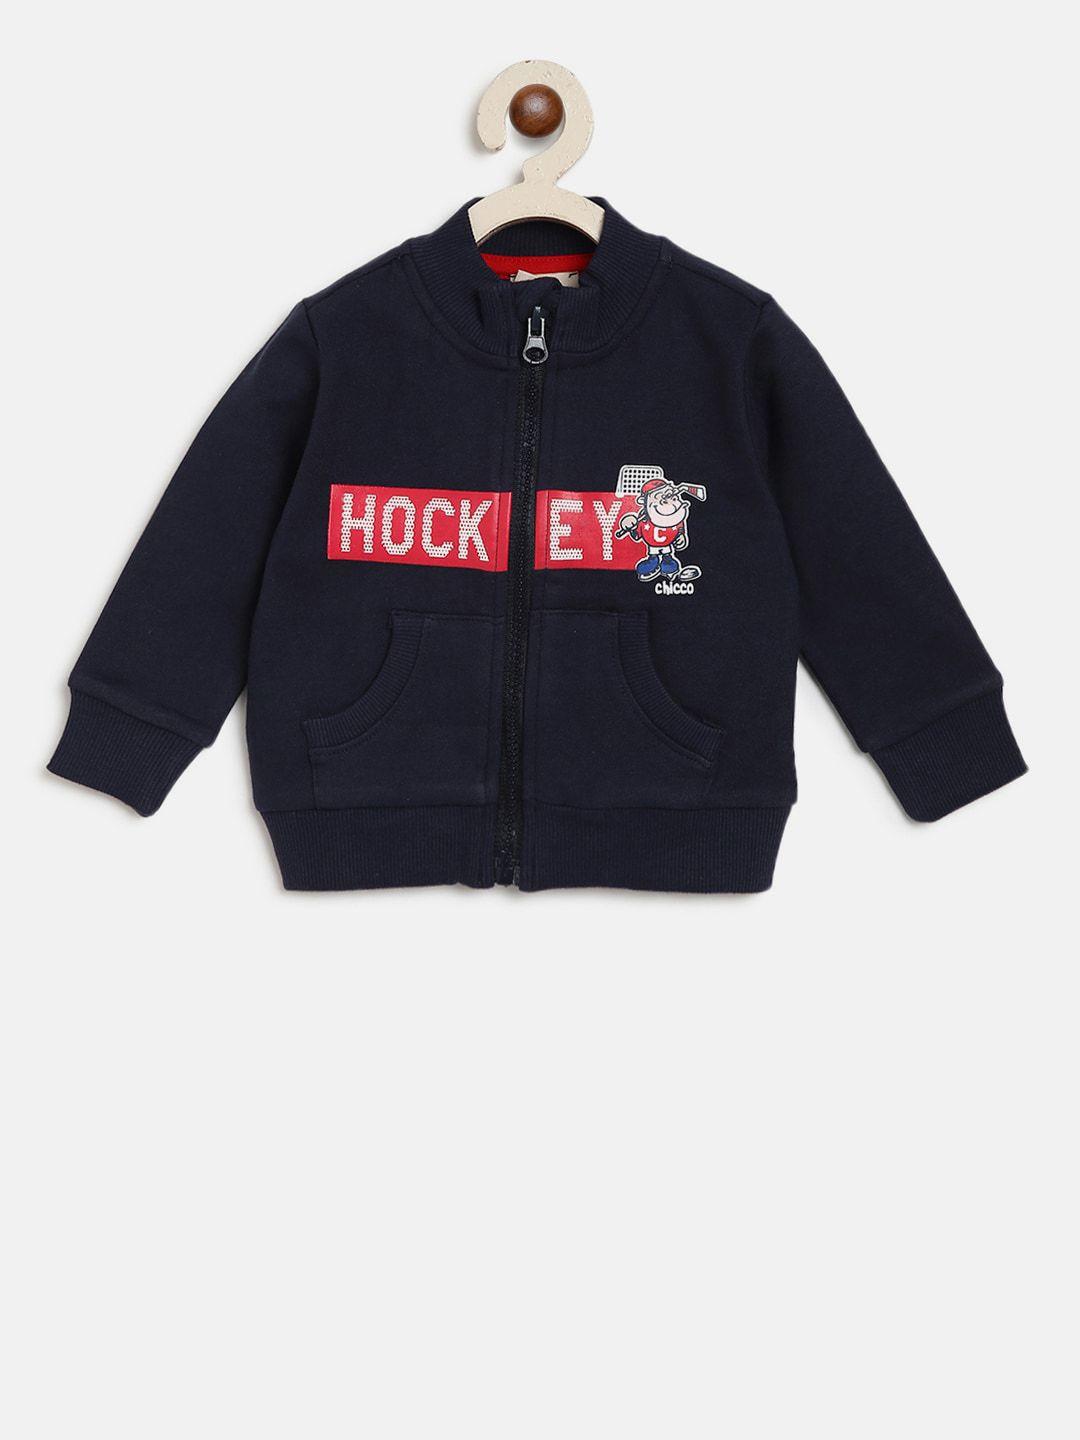 chicco-boys-navy-blue-solid-cardigan-sweater